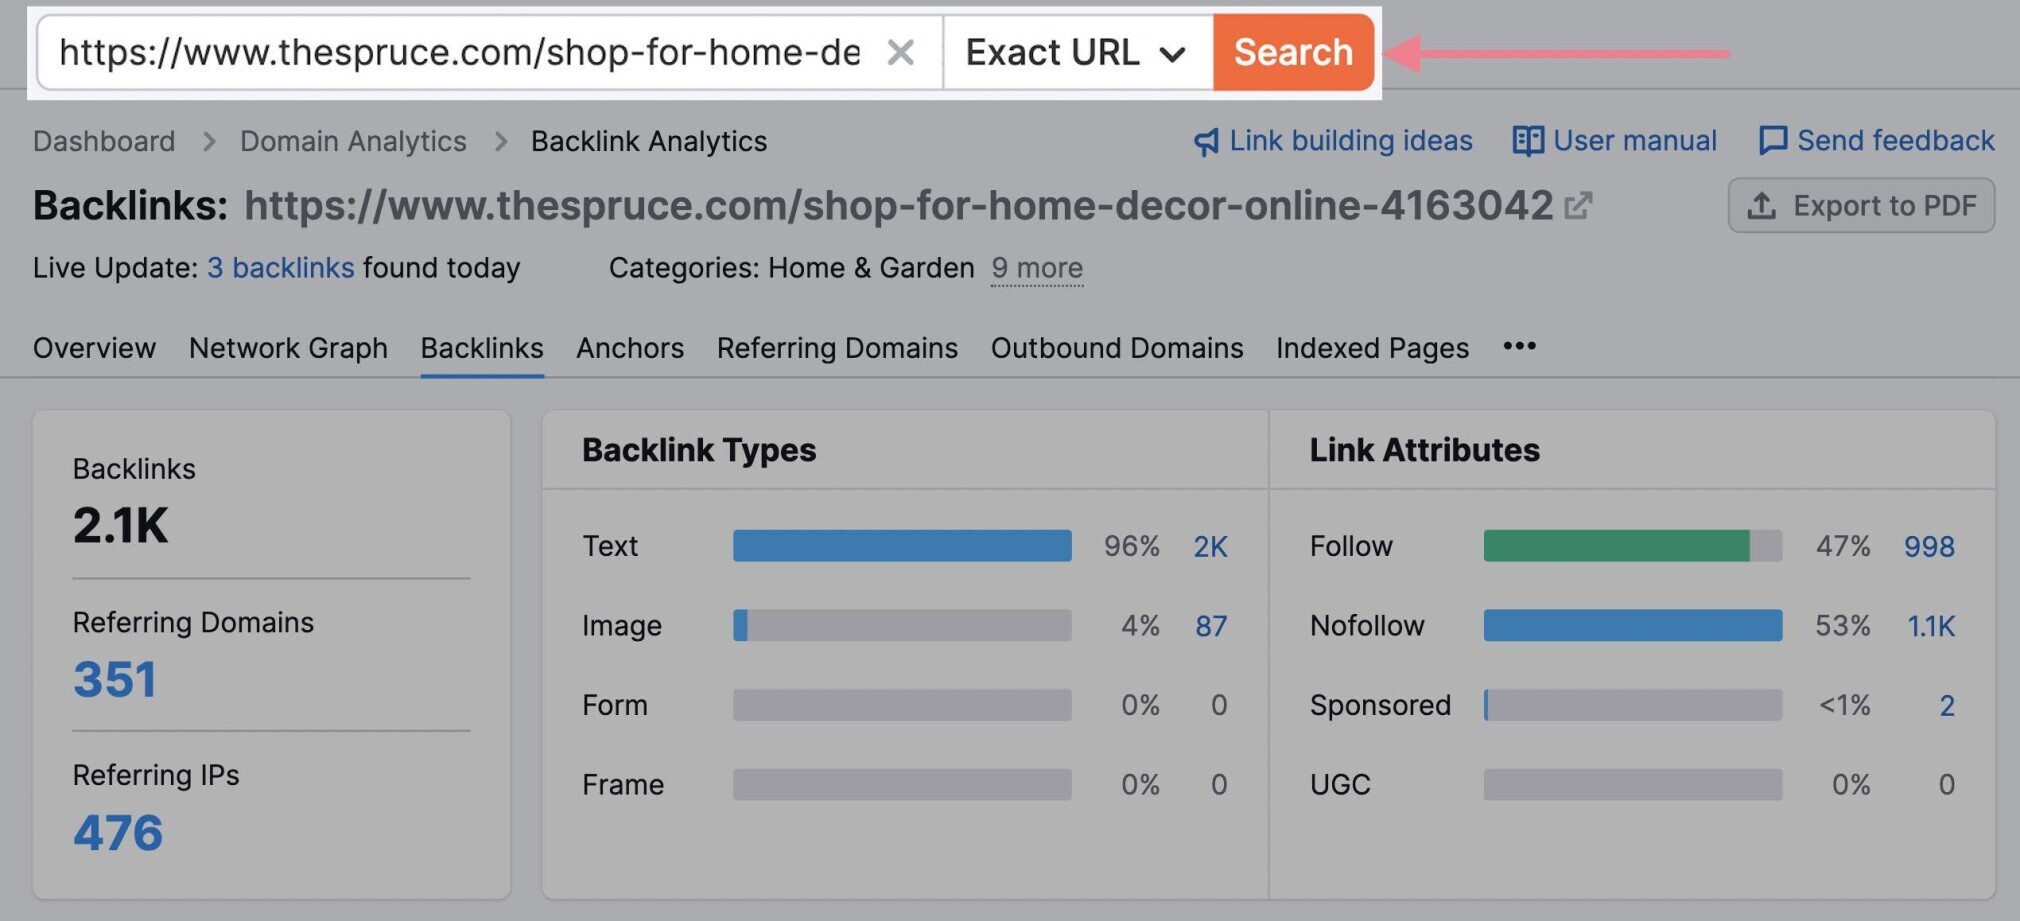 exact url search in backlink analytics